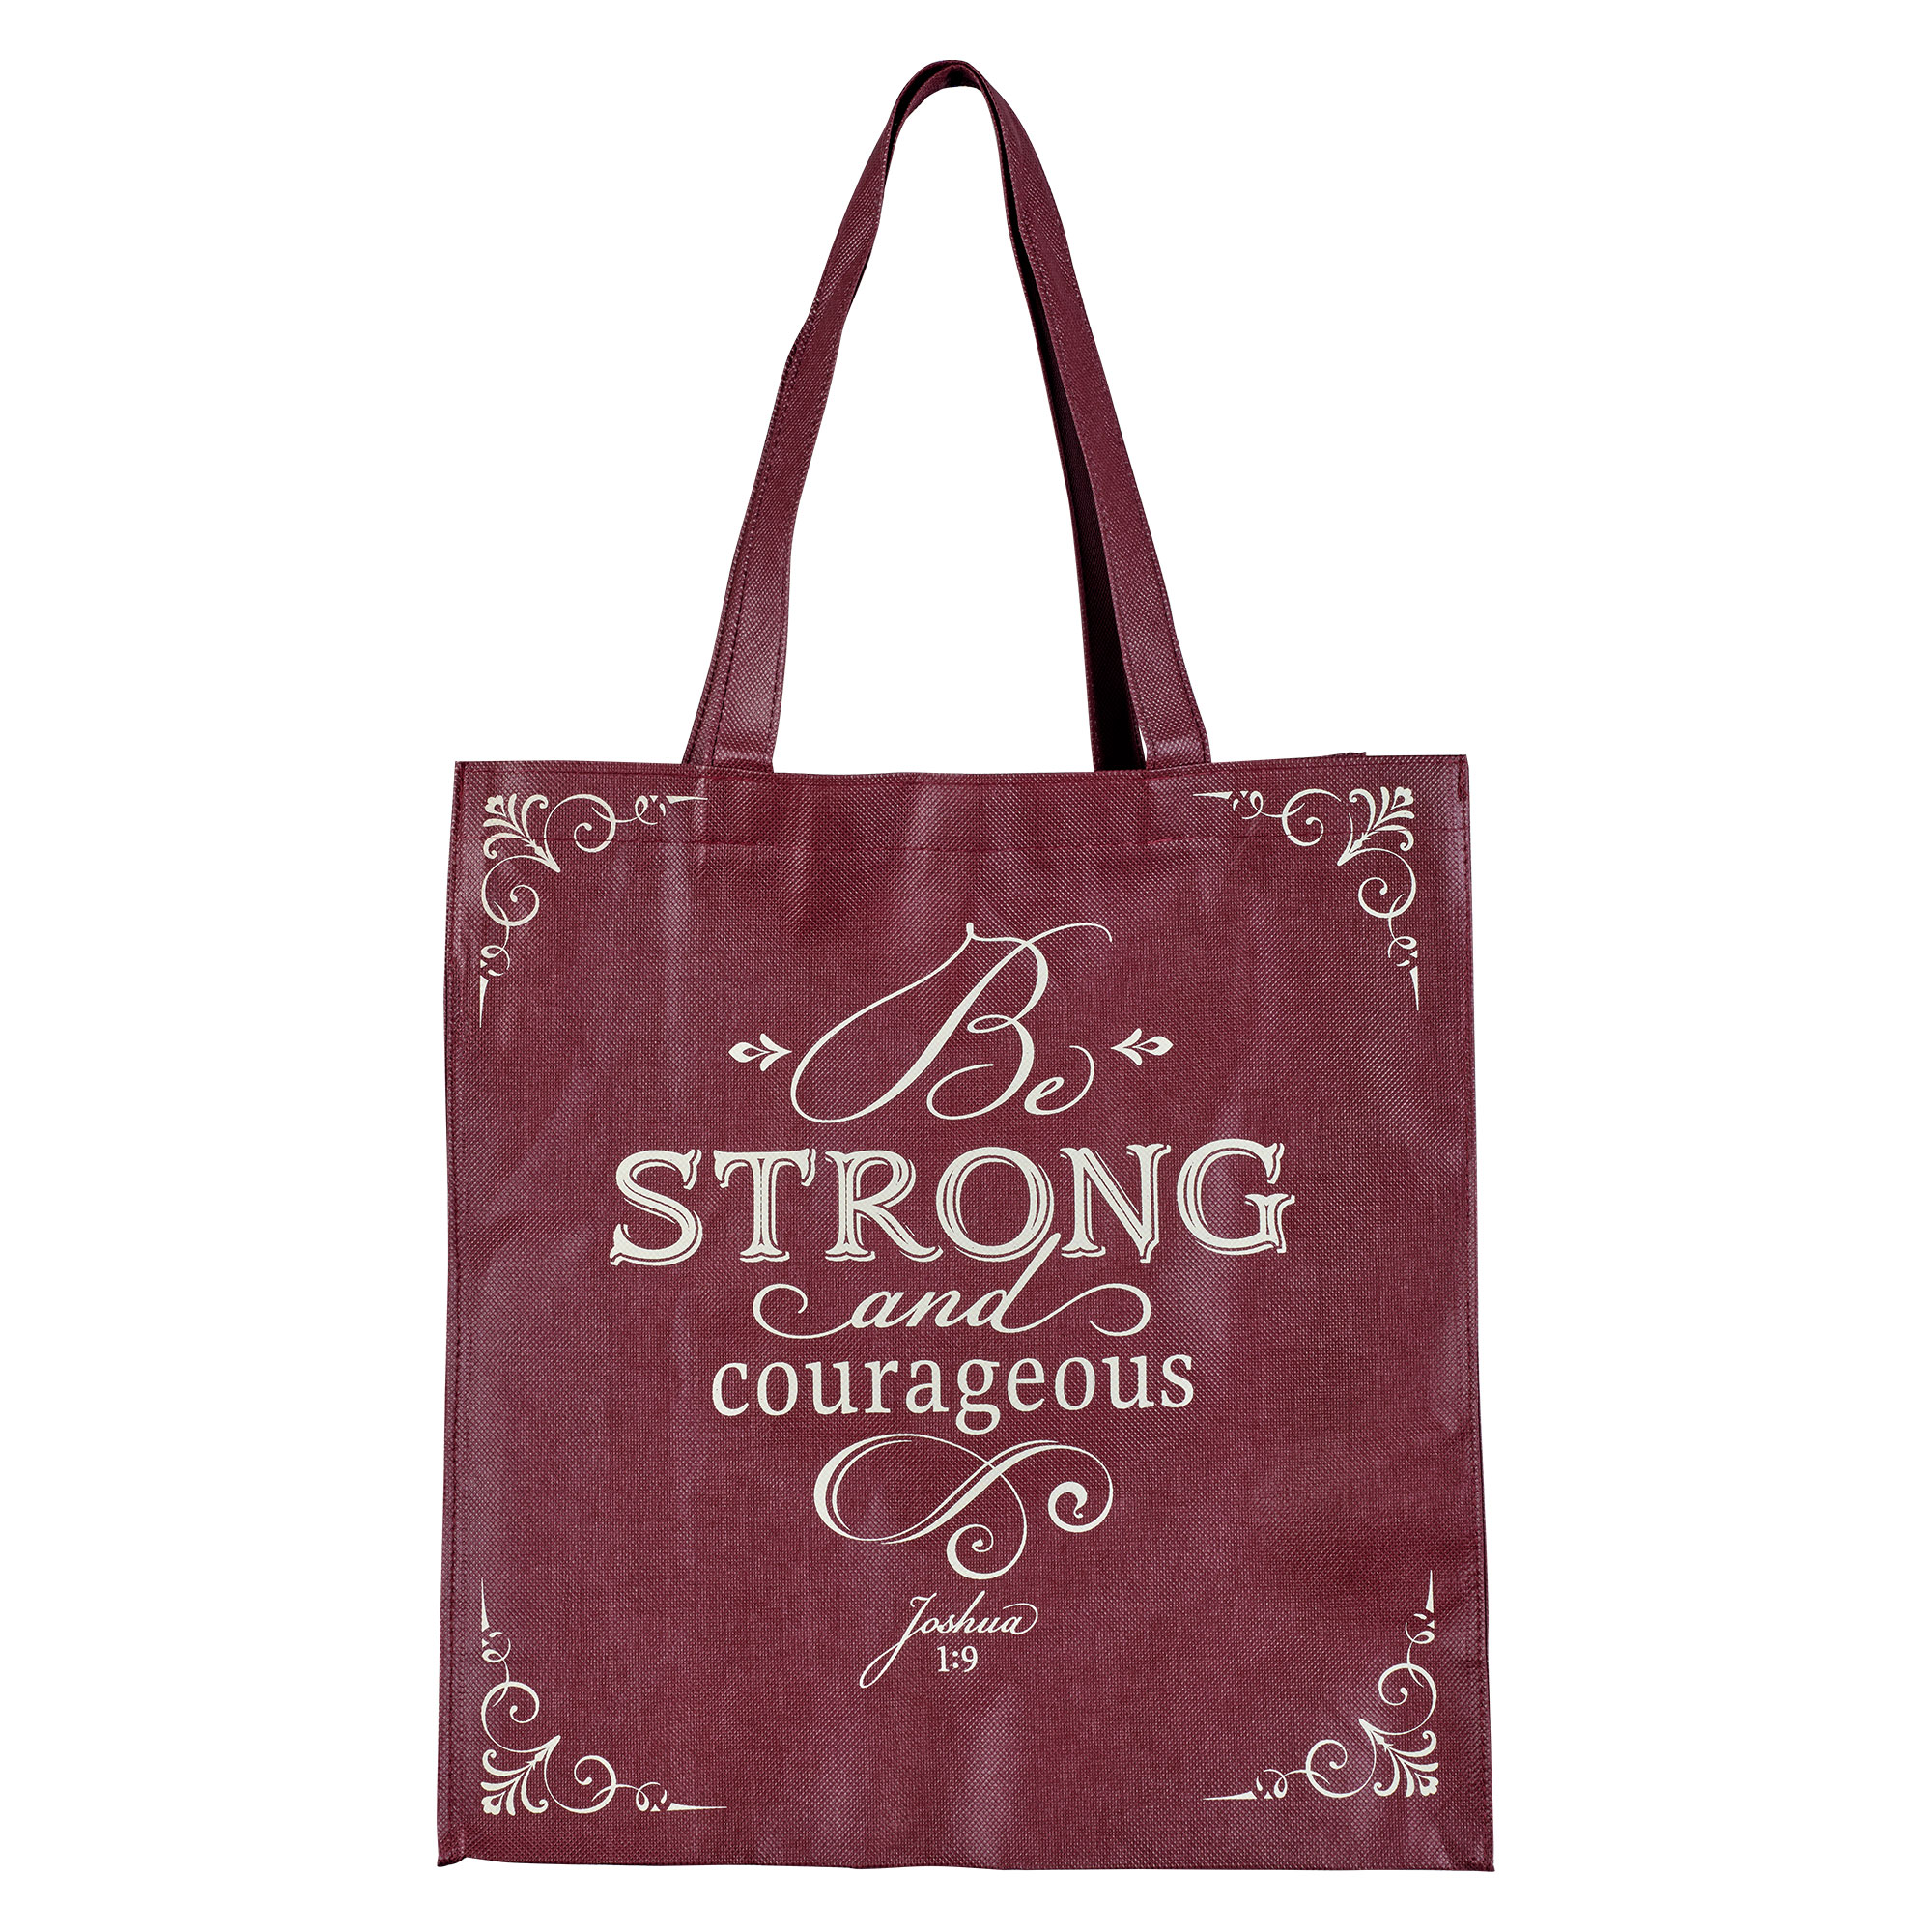 Christian Art Gifts Reusable Fashion Shopping Tote Bag for Women: Be Strong  and Courageous - Joshua 1:9 Inspirational Bible Verse Durable Handbag for  Travel, Crafts, Groceries, Books, Supplies, Maroon 